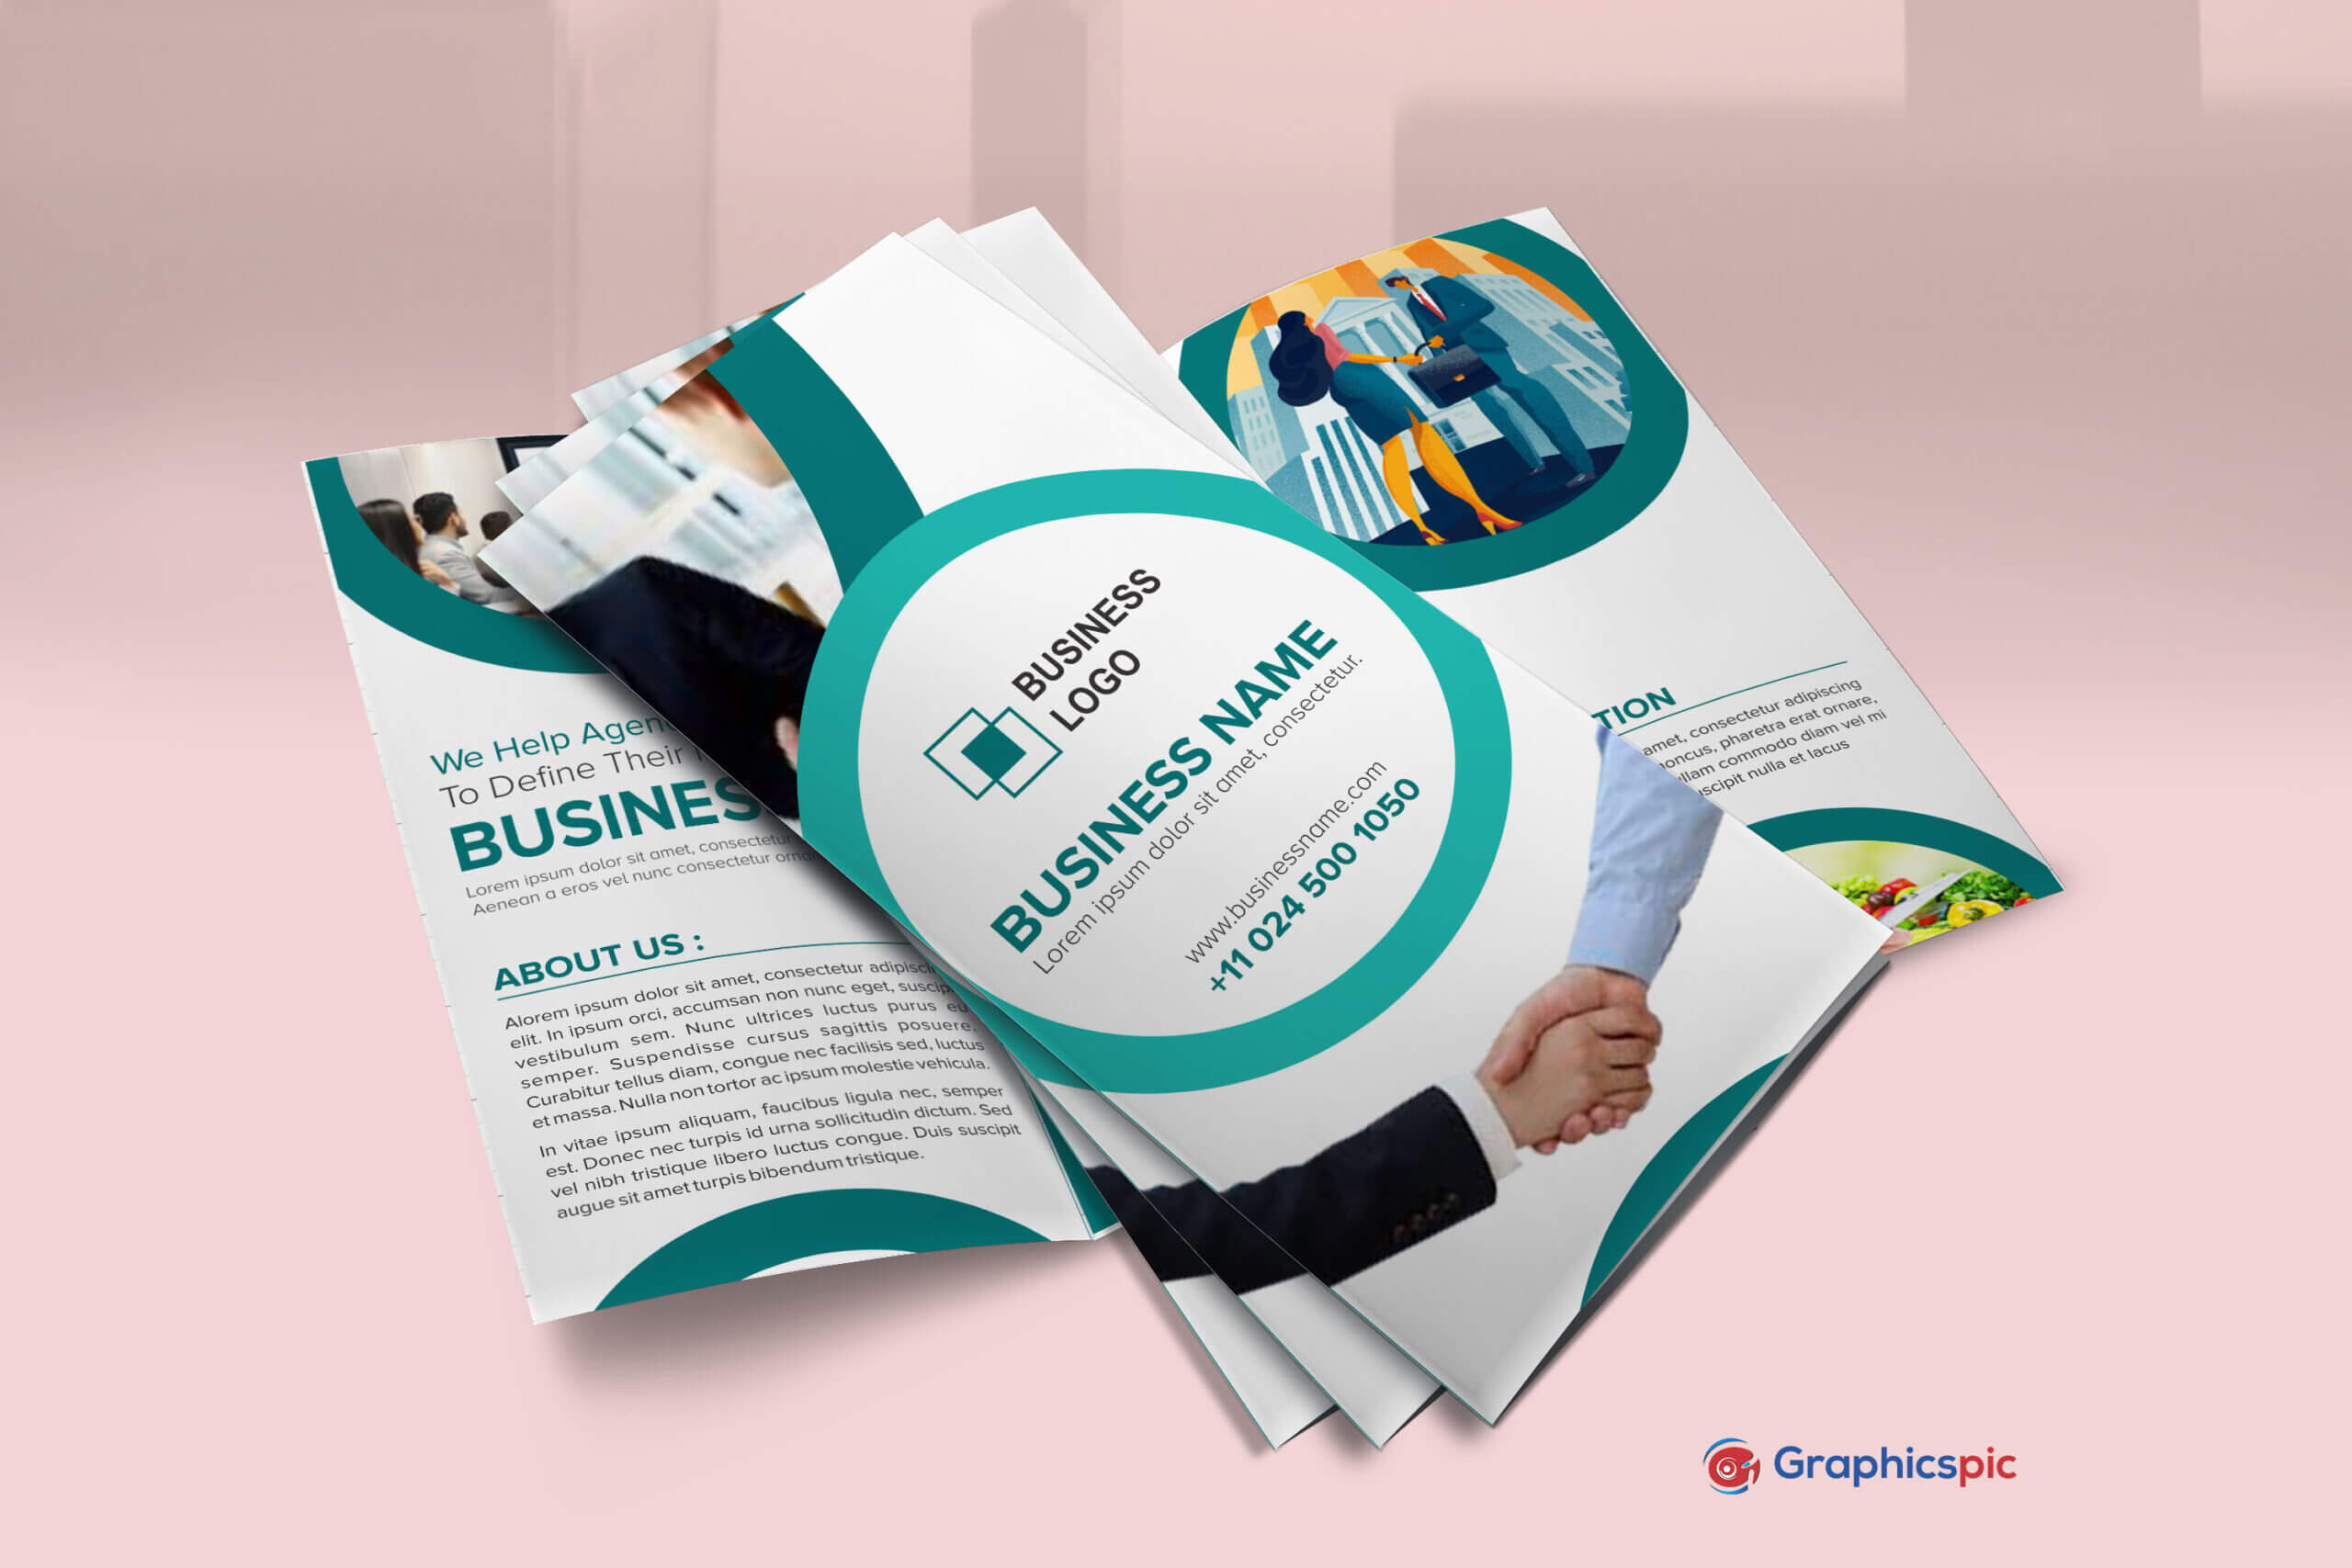 Free Download Brochure Templates Design For Events, Products Pertaining To Free Brochure Template Downloads